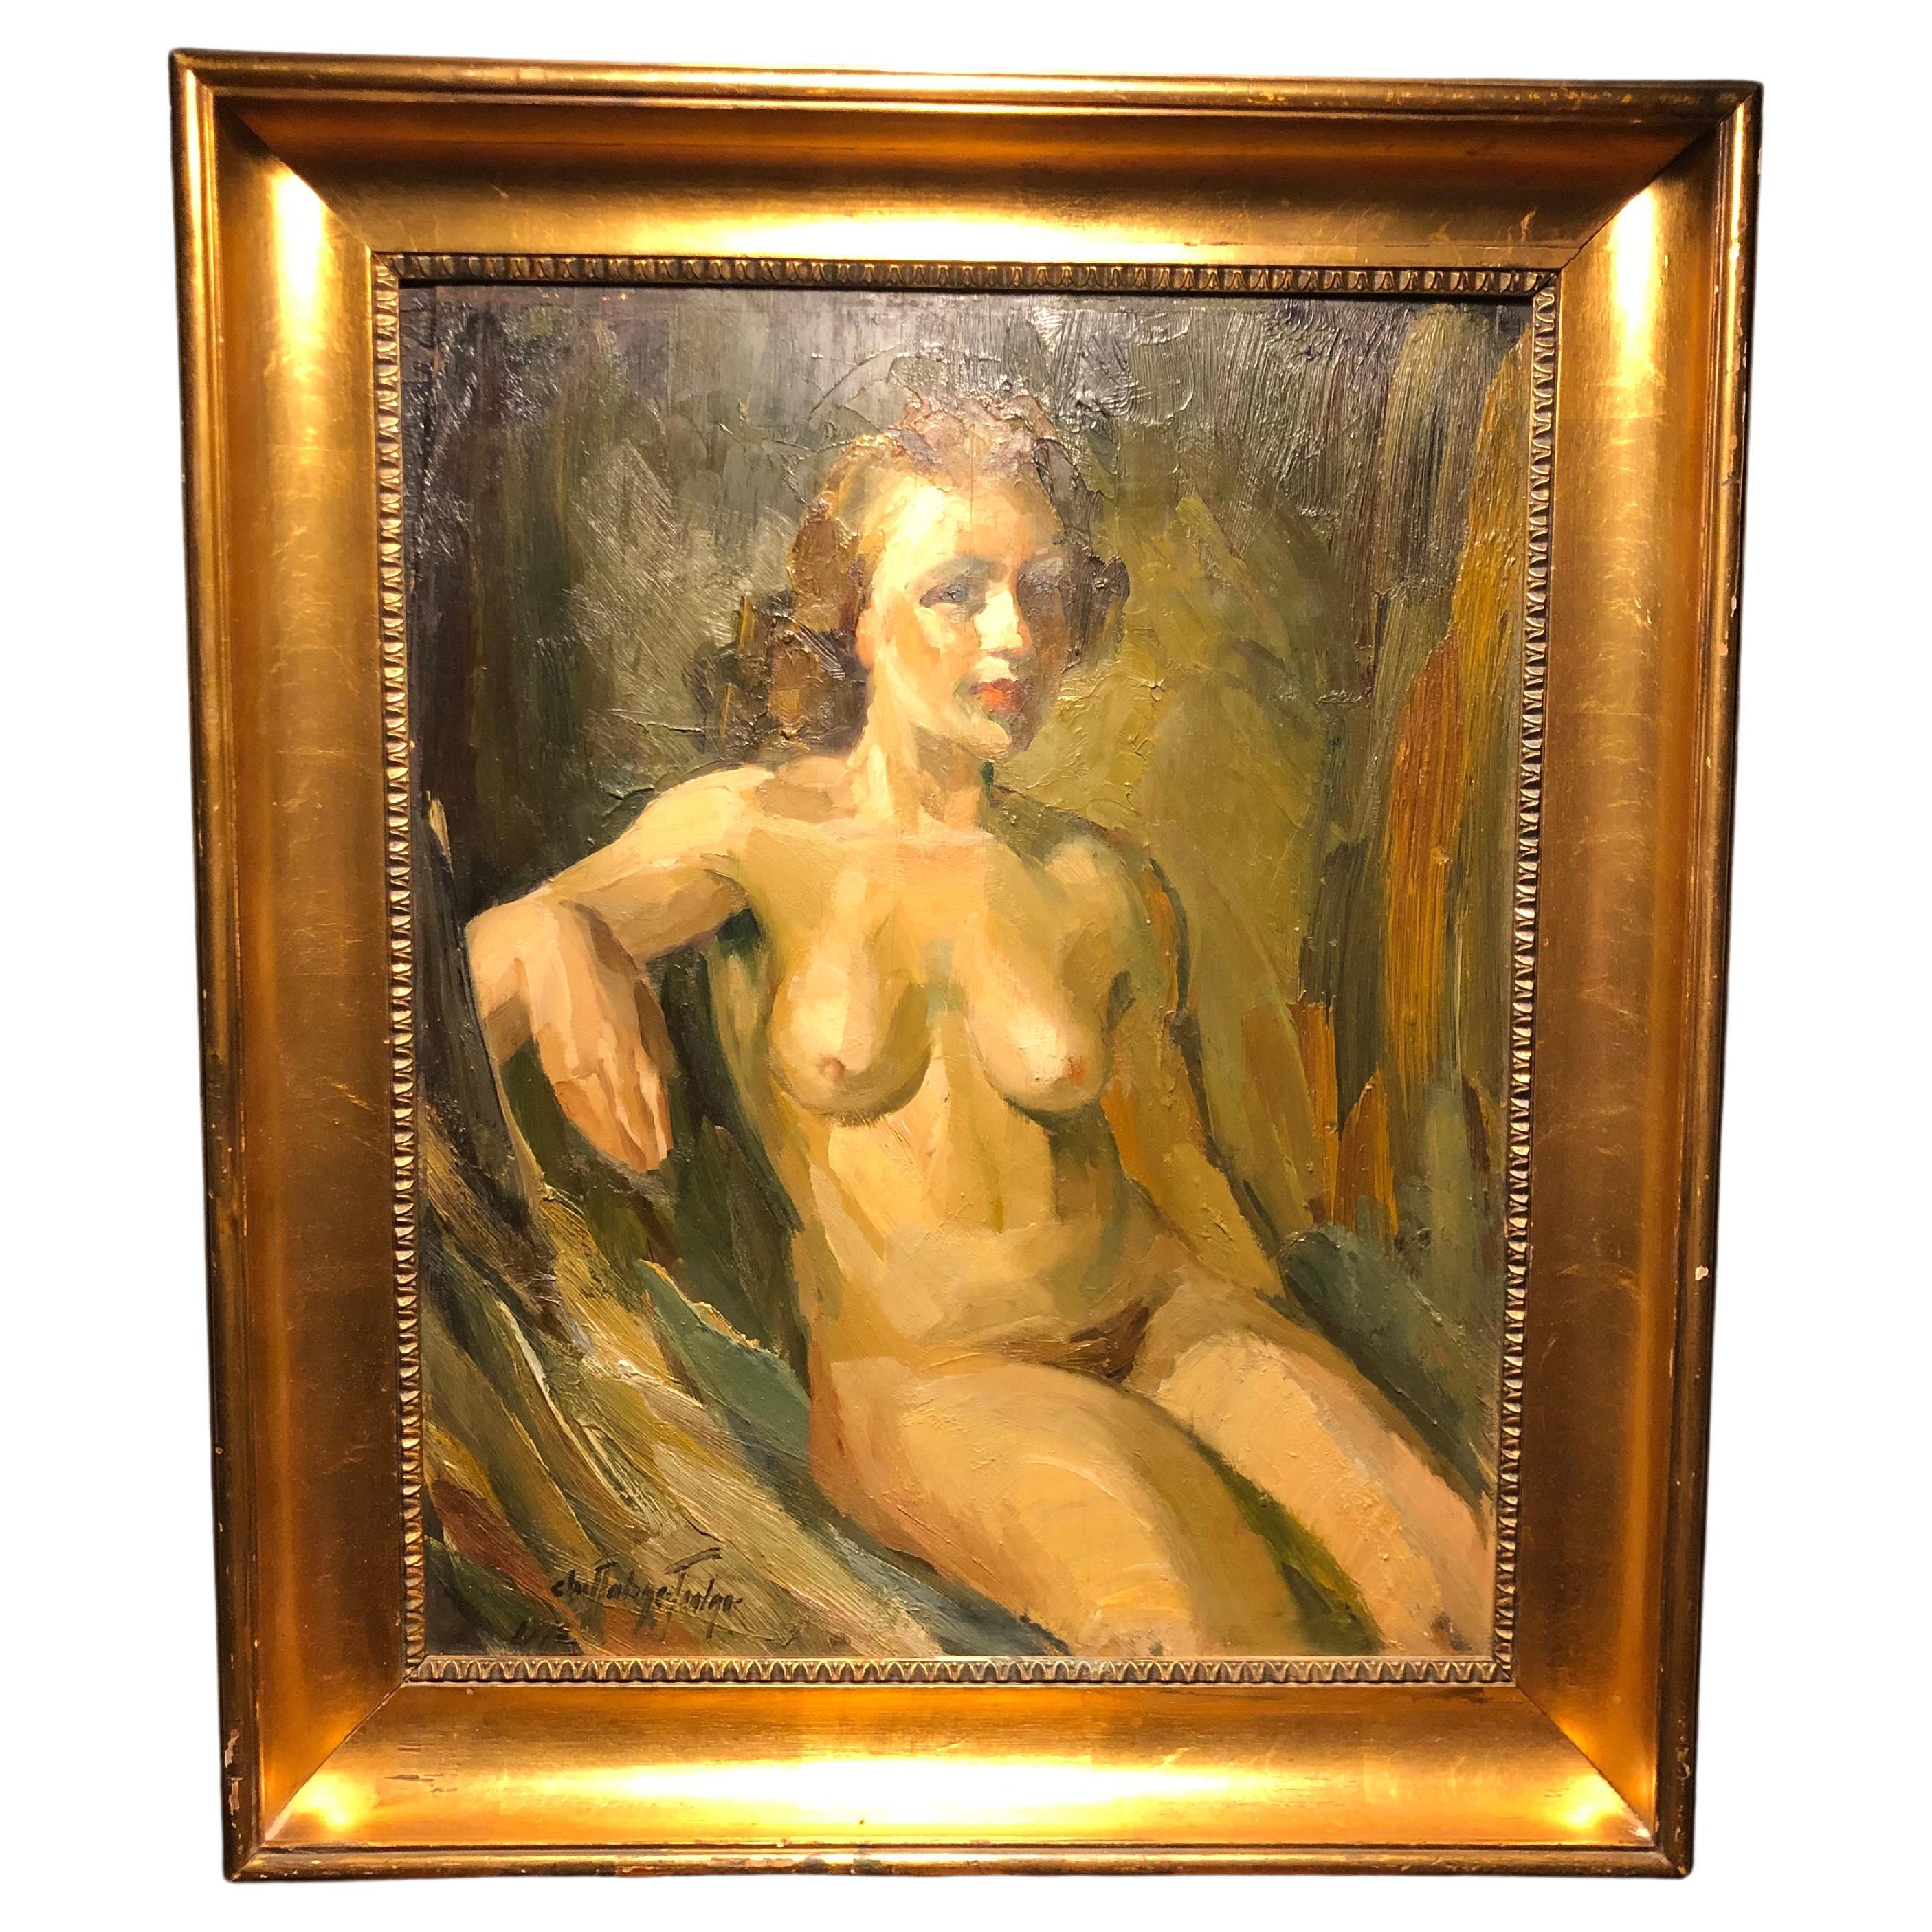 Nude Oil on Board Portrait by Christian Aabye Tage of a Sitting Woman